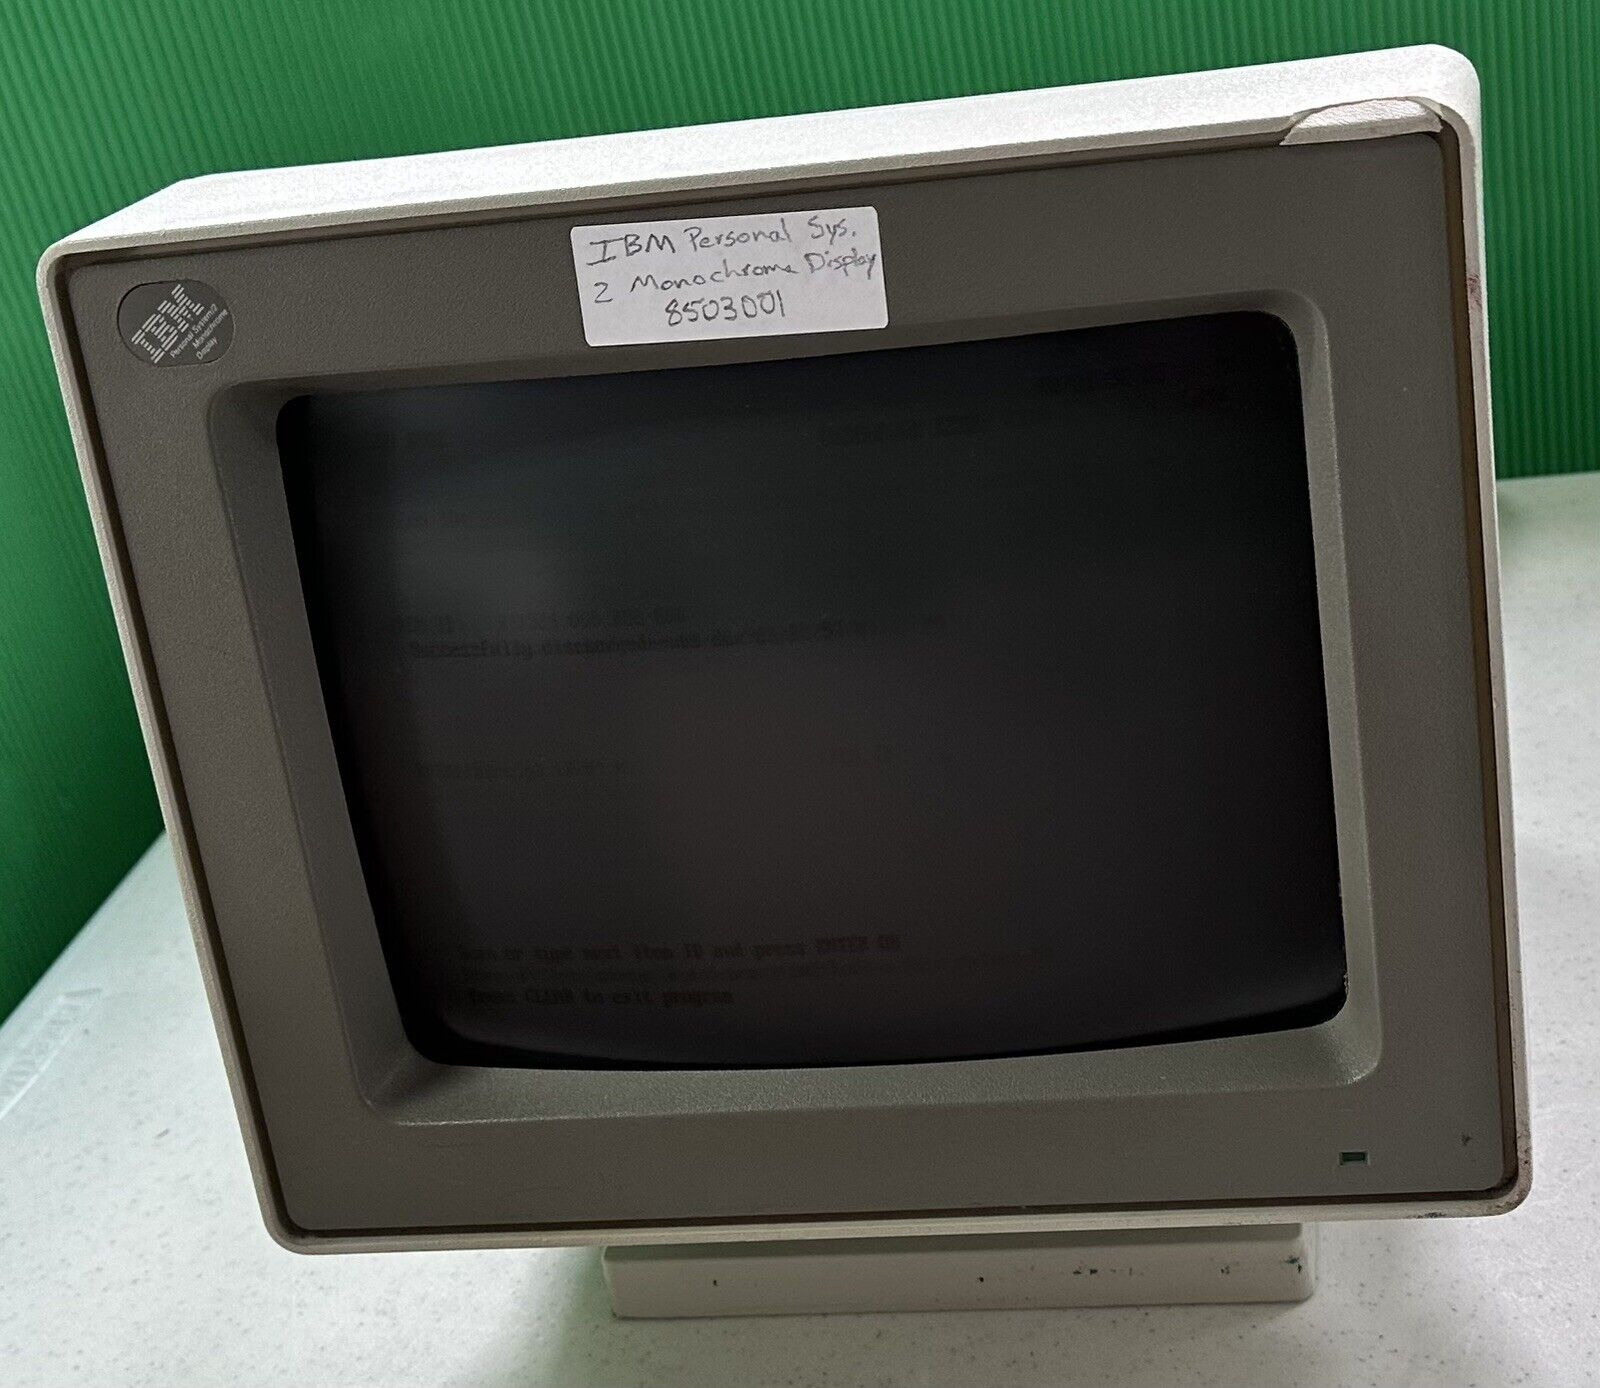 Vintage IBM 8503001 - Personal System/2 Monochrome Display -untested-parts-as is